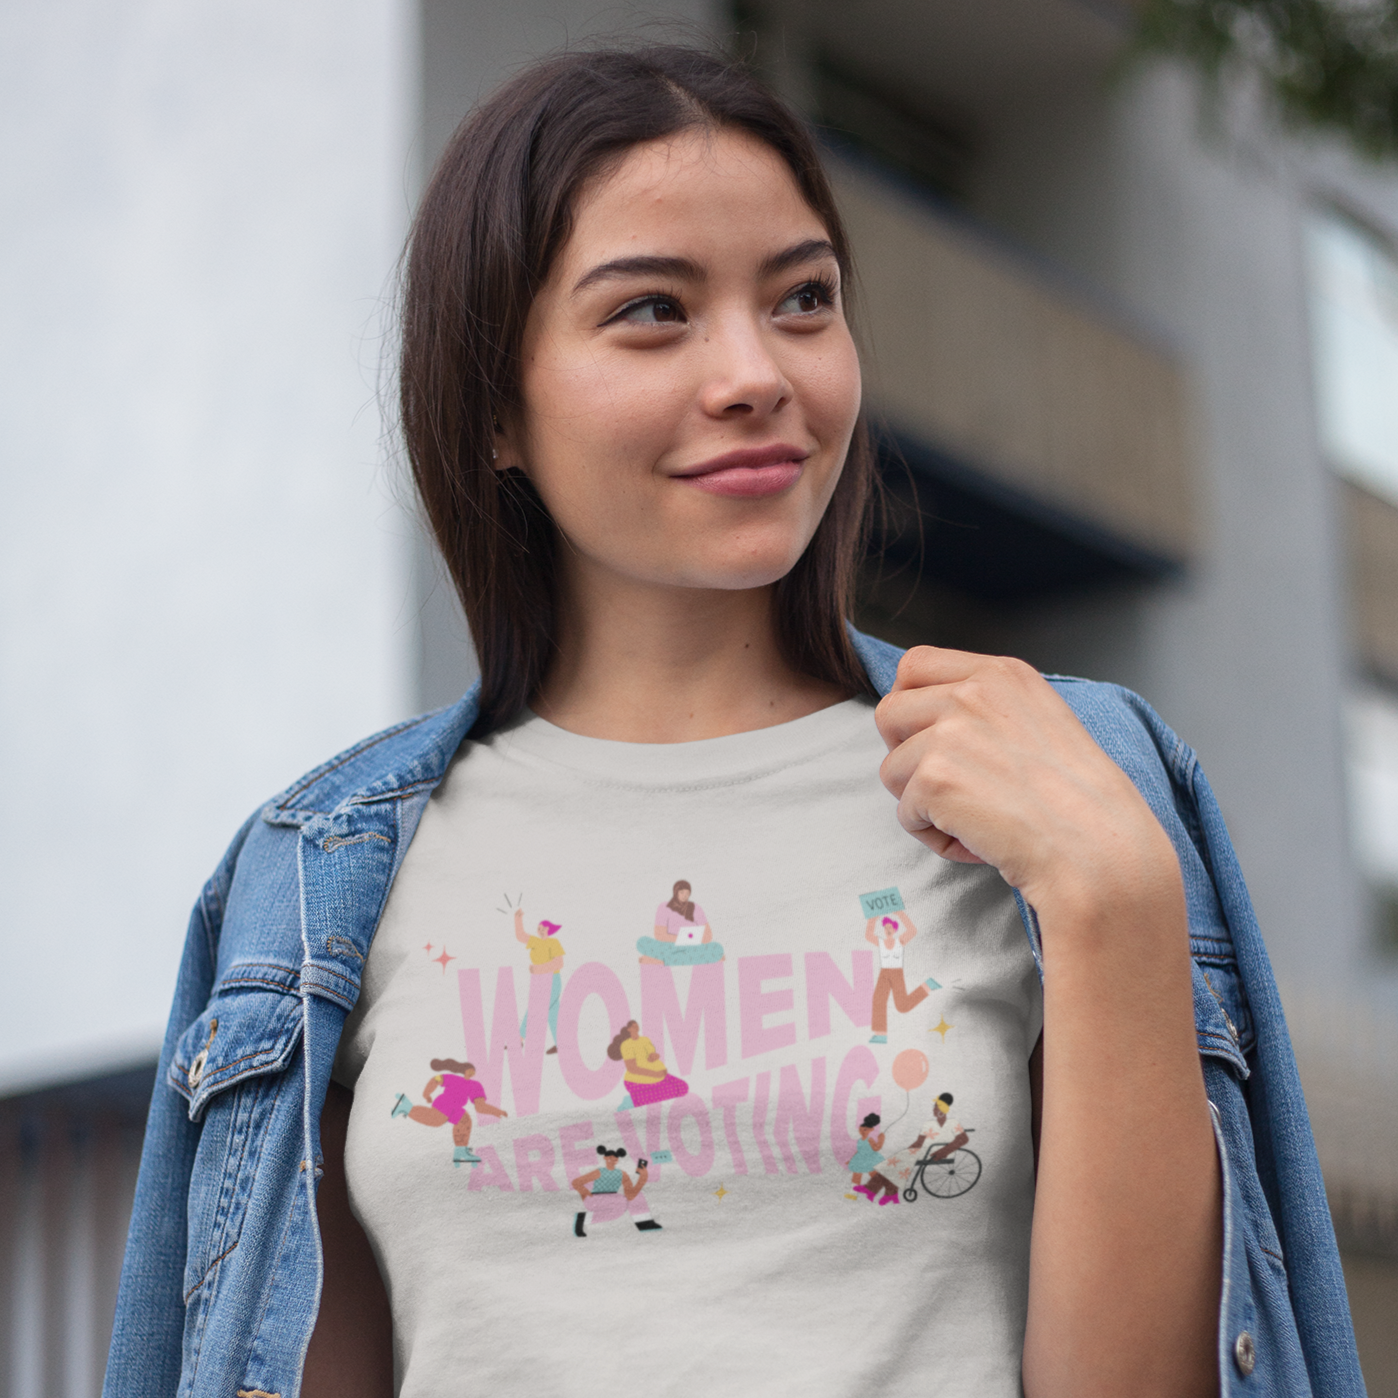 A young woman with dark hair and a jean jacket over her shoulders wears a cream t-shirt with the phrase "Women Are Voting" in pink surrounded by inclusive femme cartoon figures